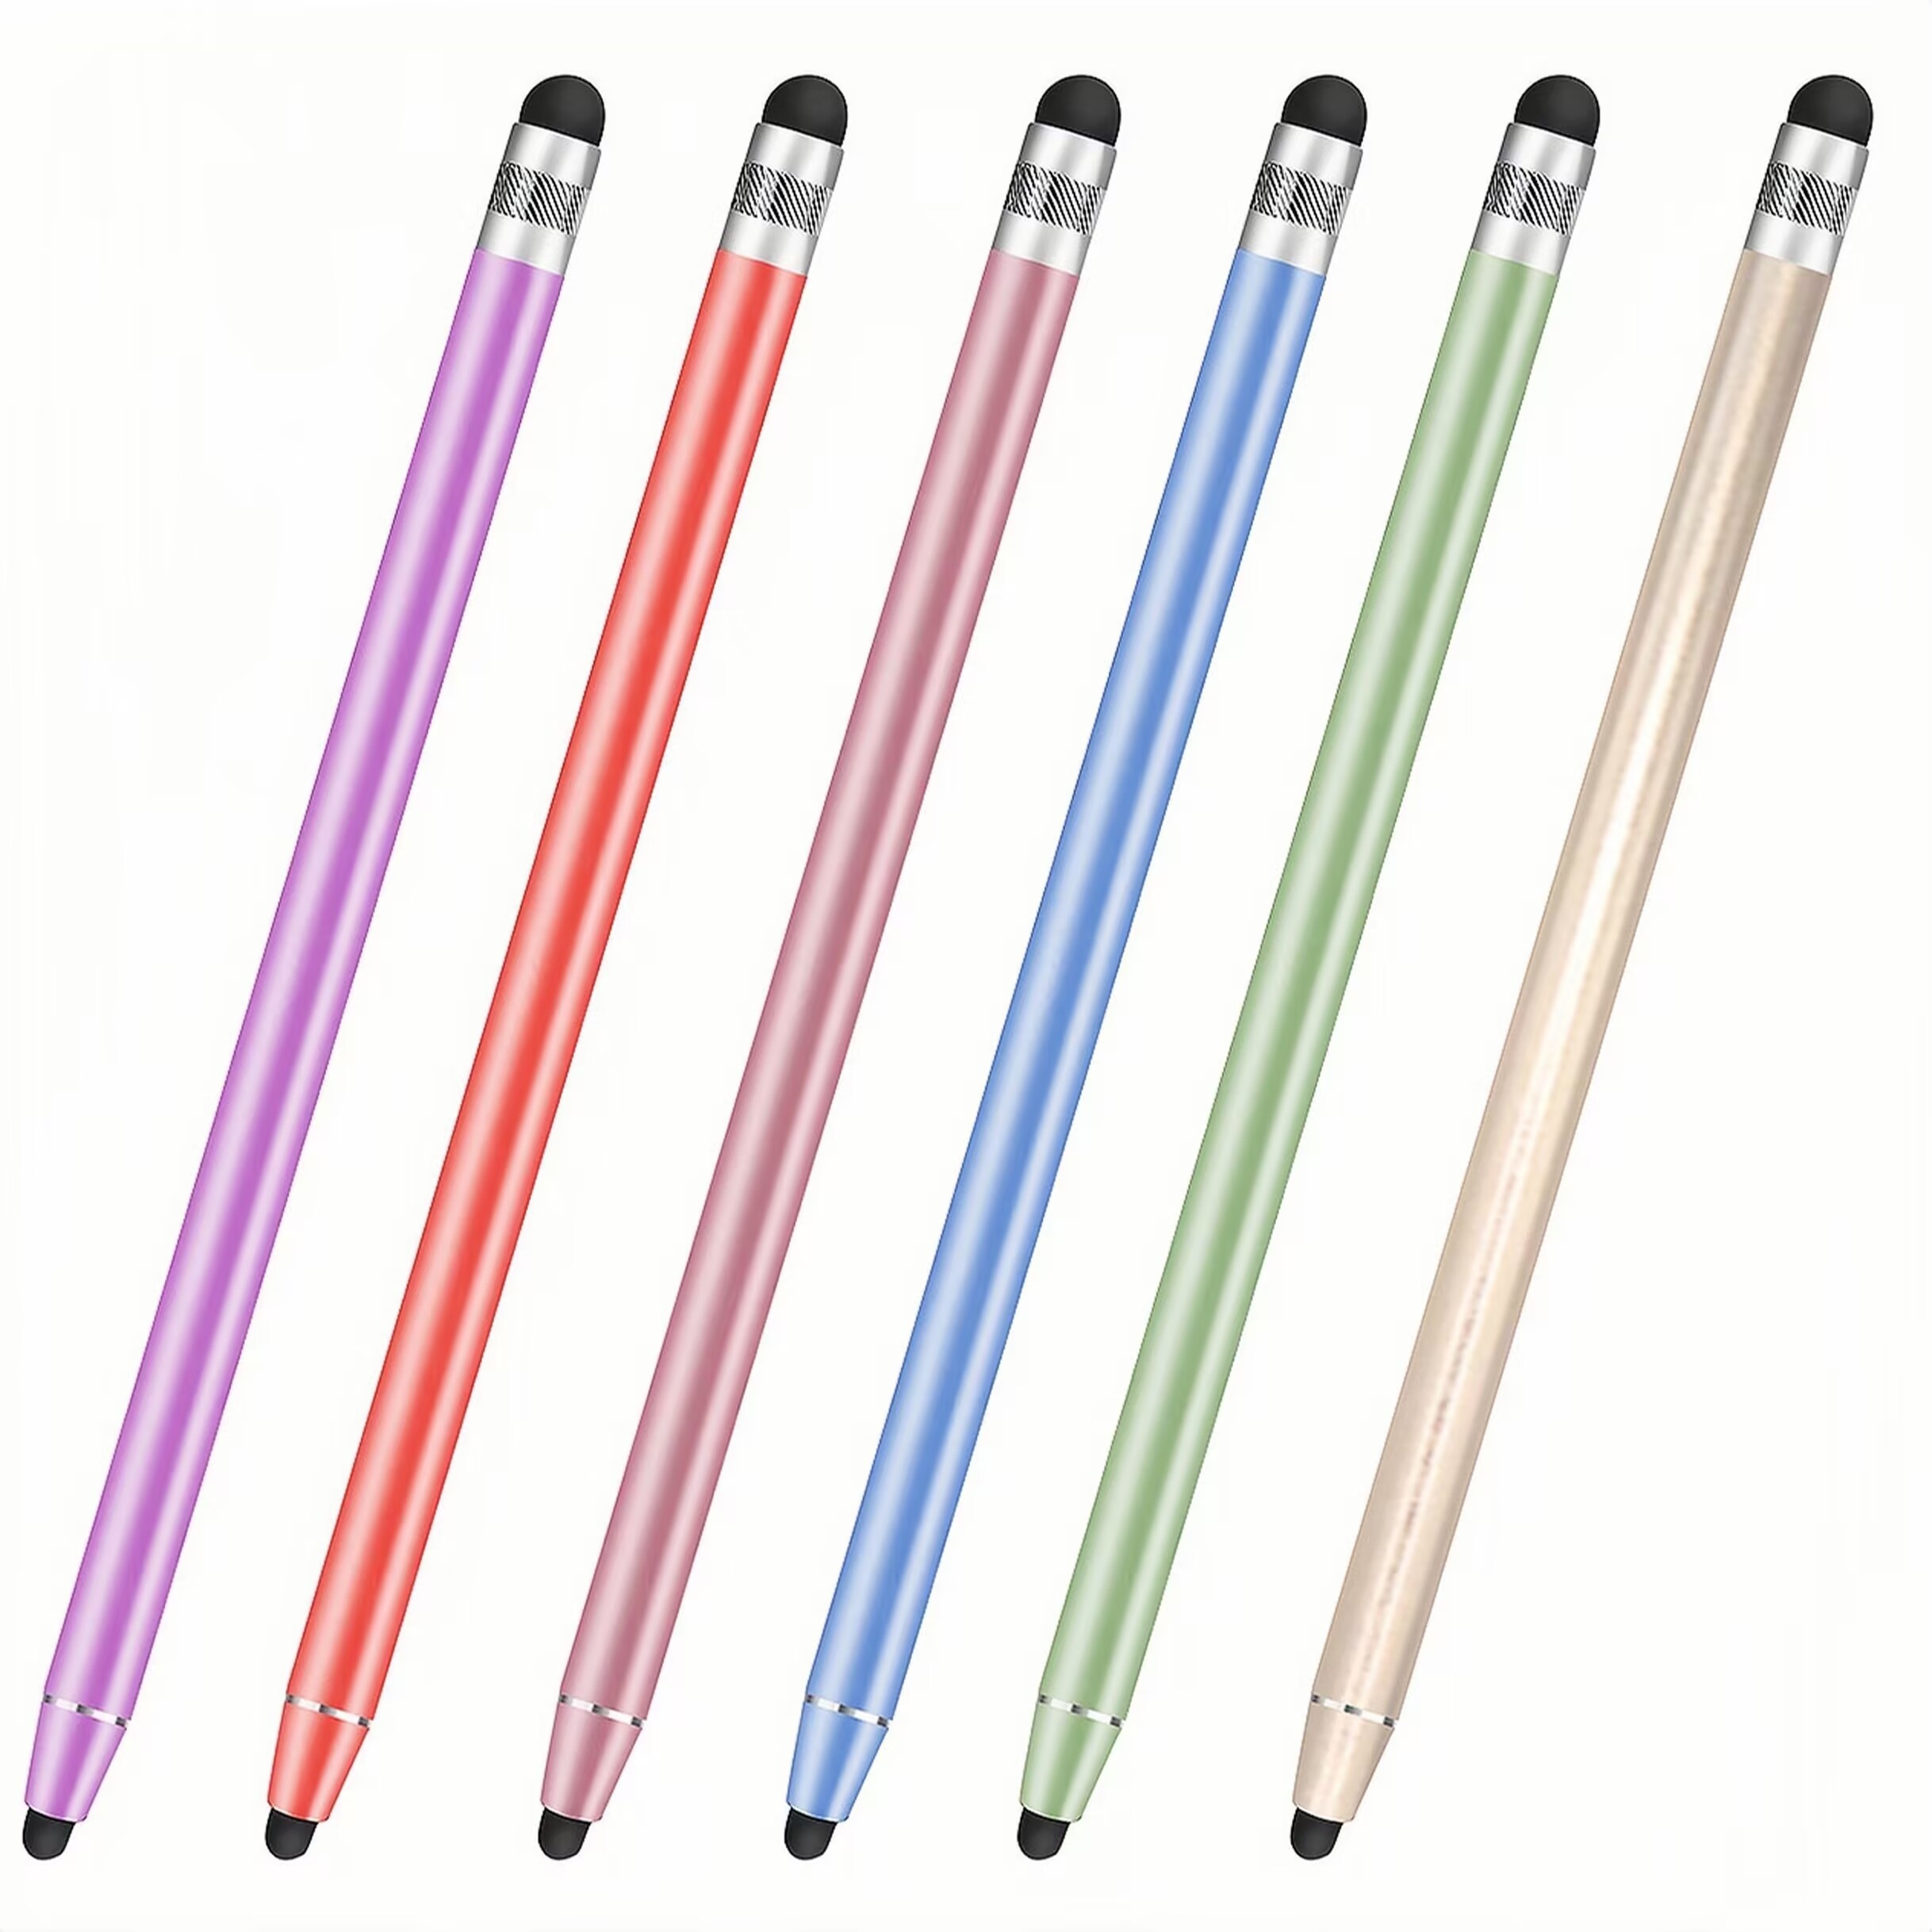 Stylus Pen [10 Pack] Universal Capacitive Touch Screen Pens for Tablets,  iPad Mini, iPad Pro, iPad Air, Smartphones, Samsung Galaxy - Multiple Colors